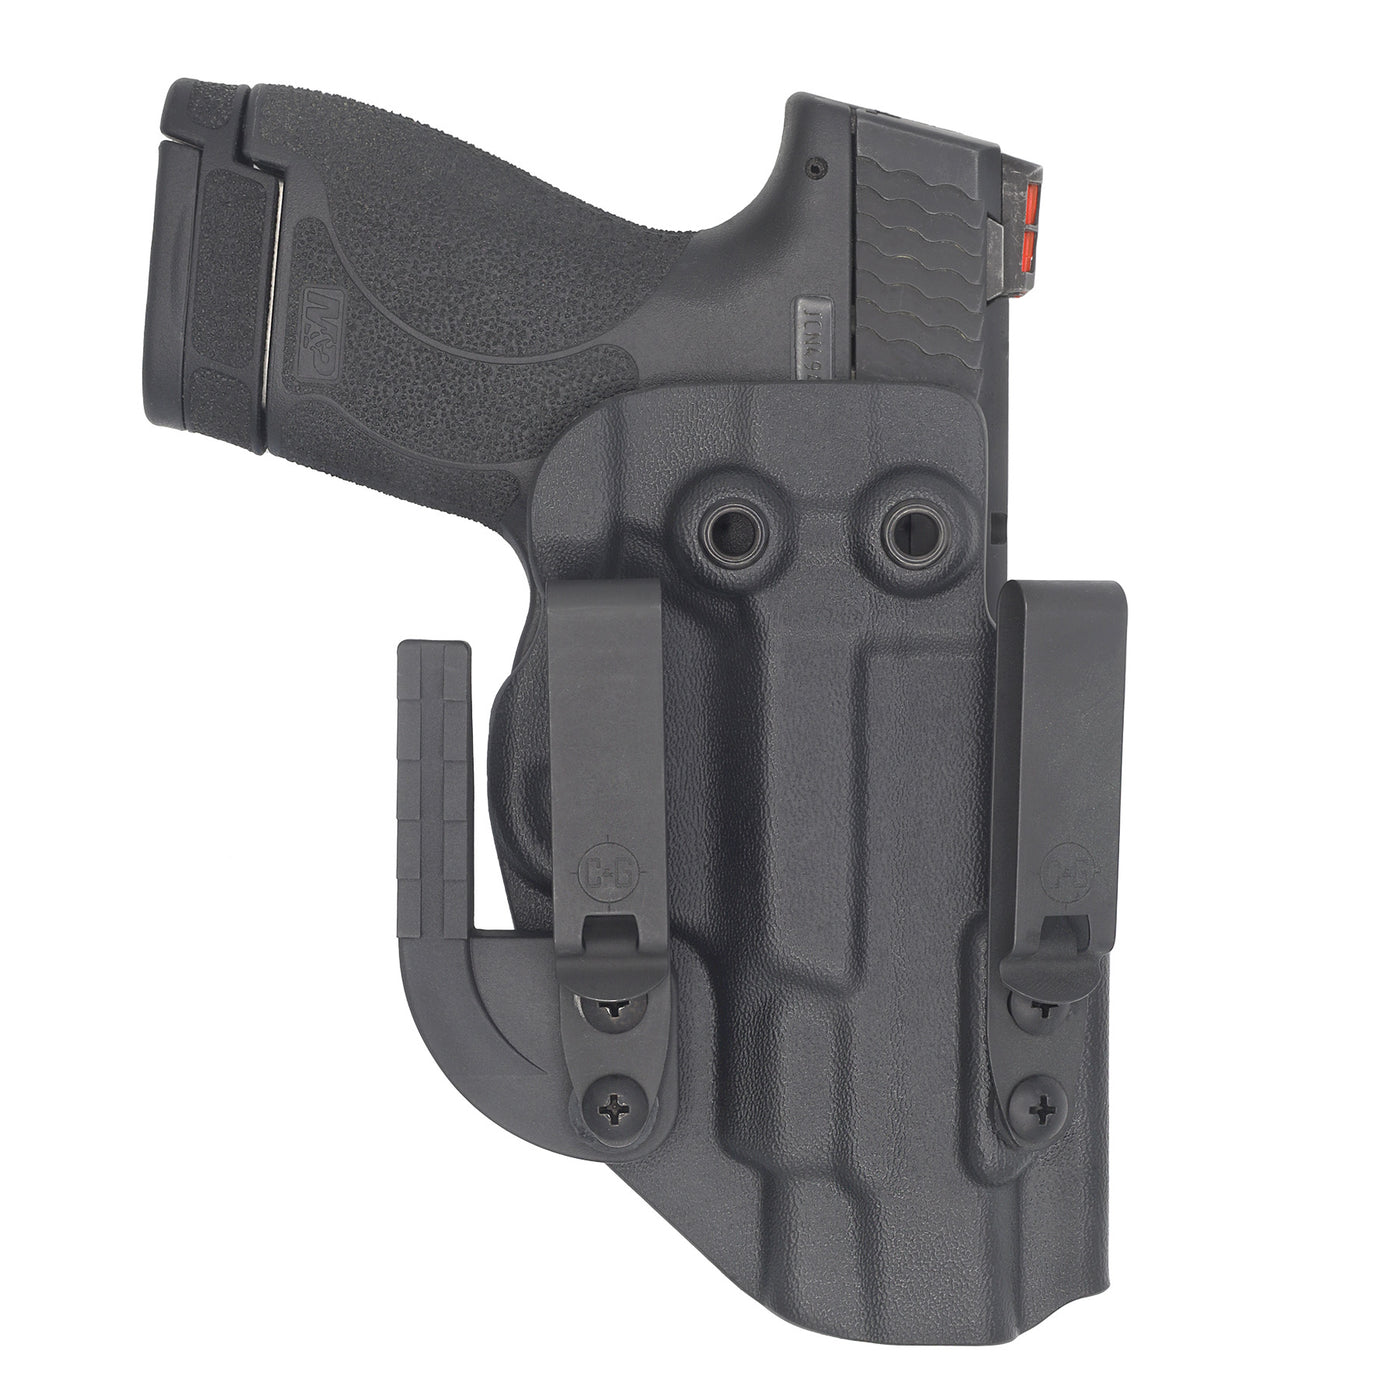 C&G Holsters quick ship Alpha IWB kydex holster for Smith & Wesson M&P Shield 9/40 4" in holstered position